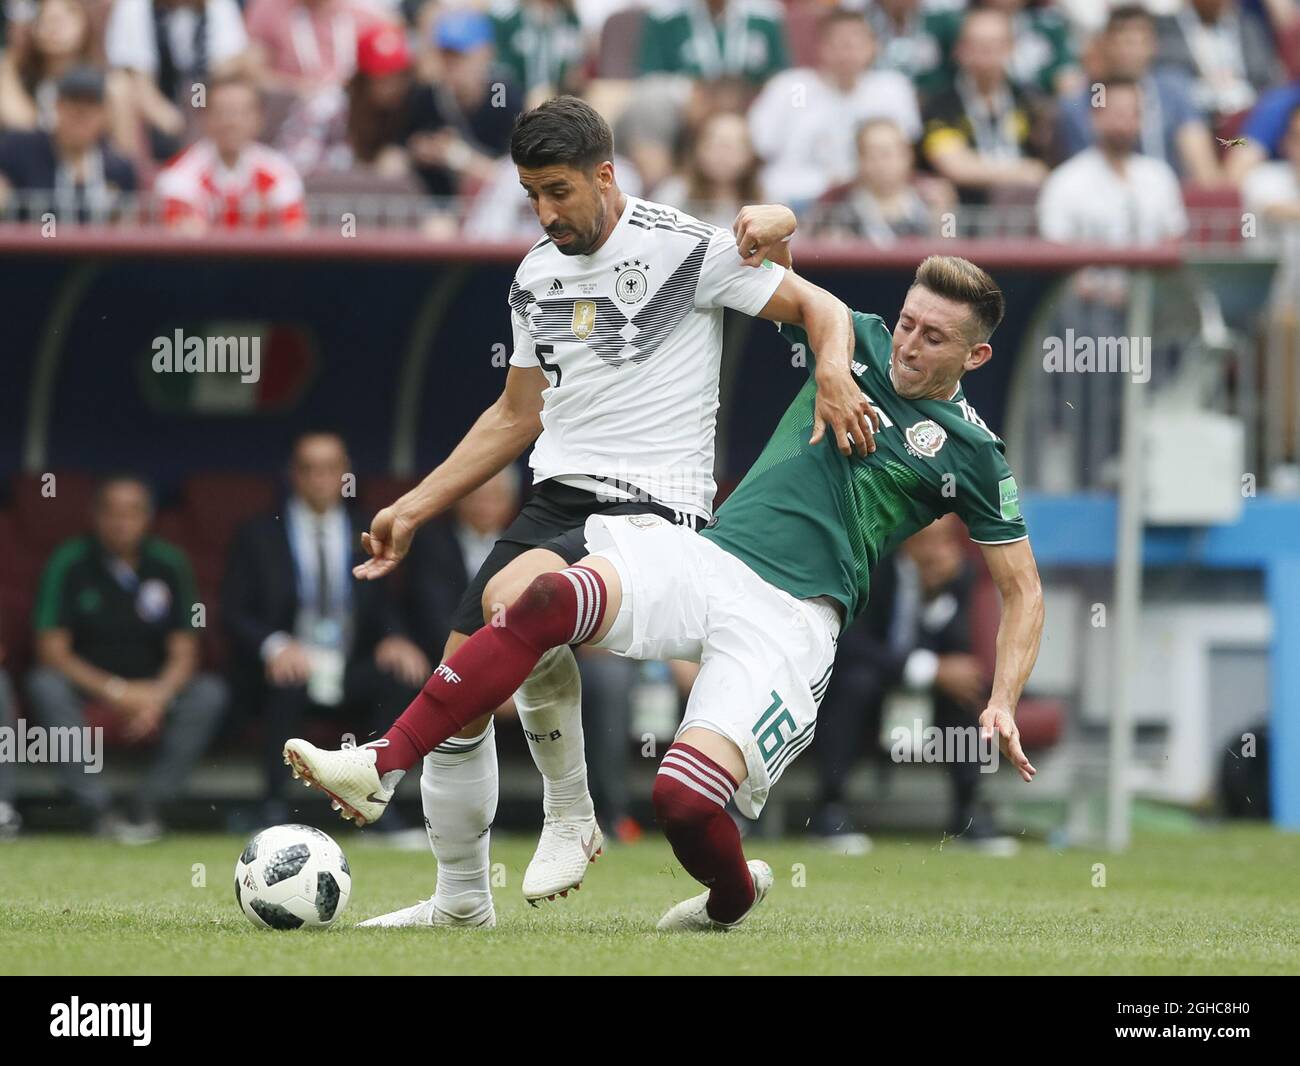 Sami Khedira of Germany tackled by Hector Herrera of Mexico during the FIFA World Cup 2018 Group F match at the Luzhniki Stadium, Moscow. Picture date 17th June 2018. Picture credit should read: David Klein/Sportimage via PA Images Stock Photo